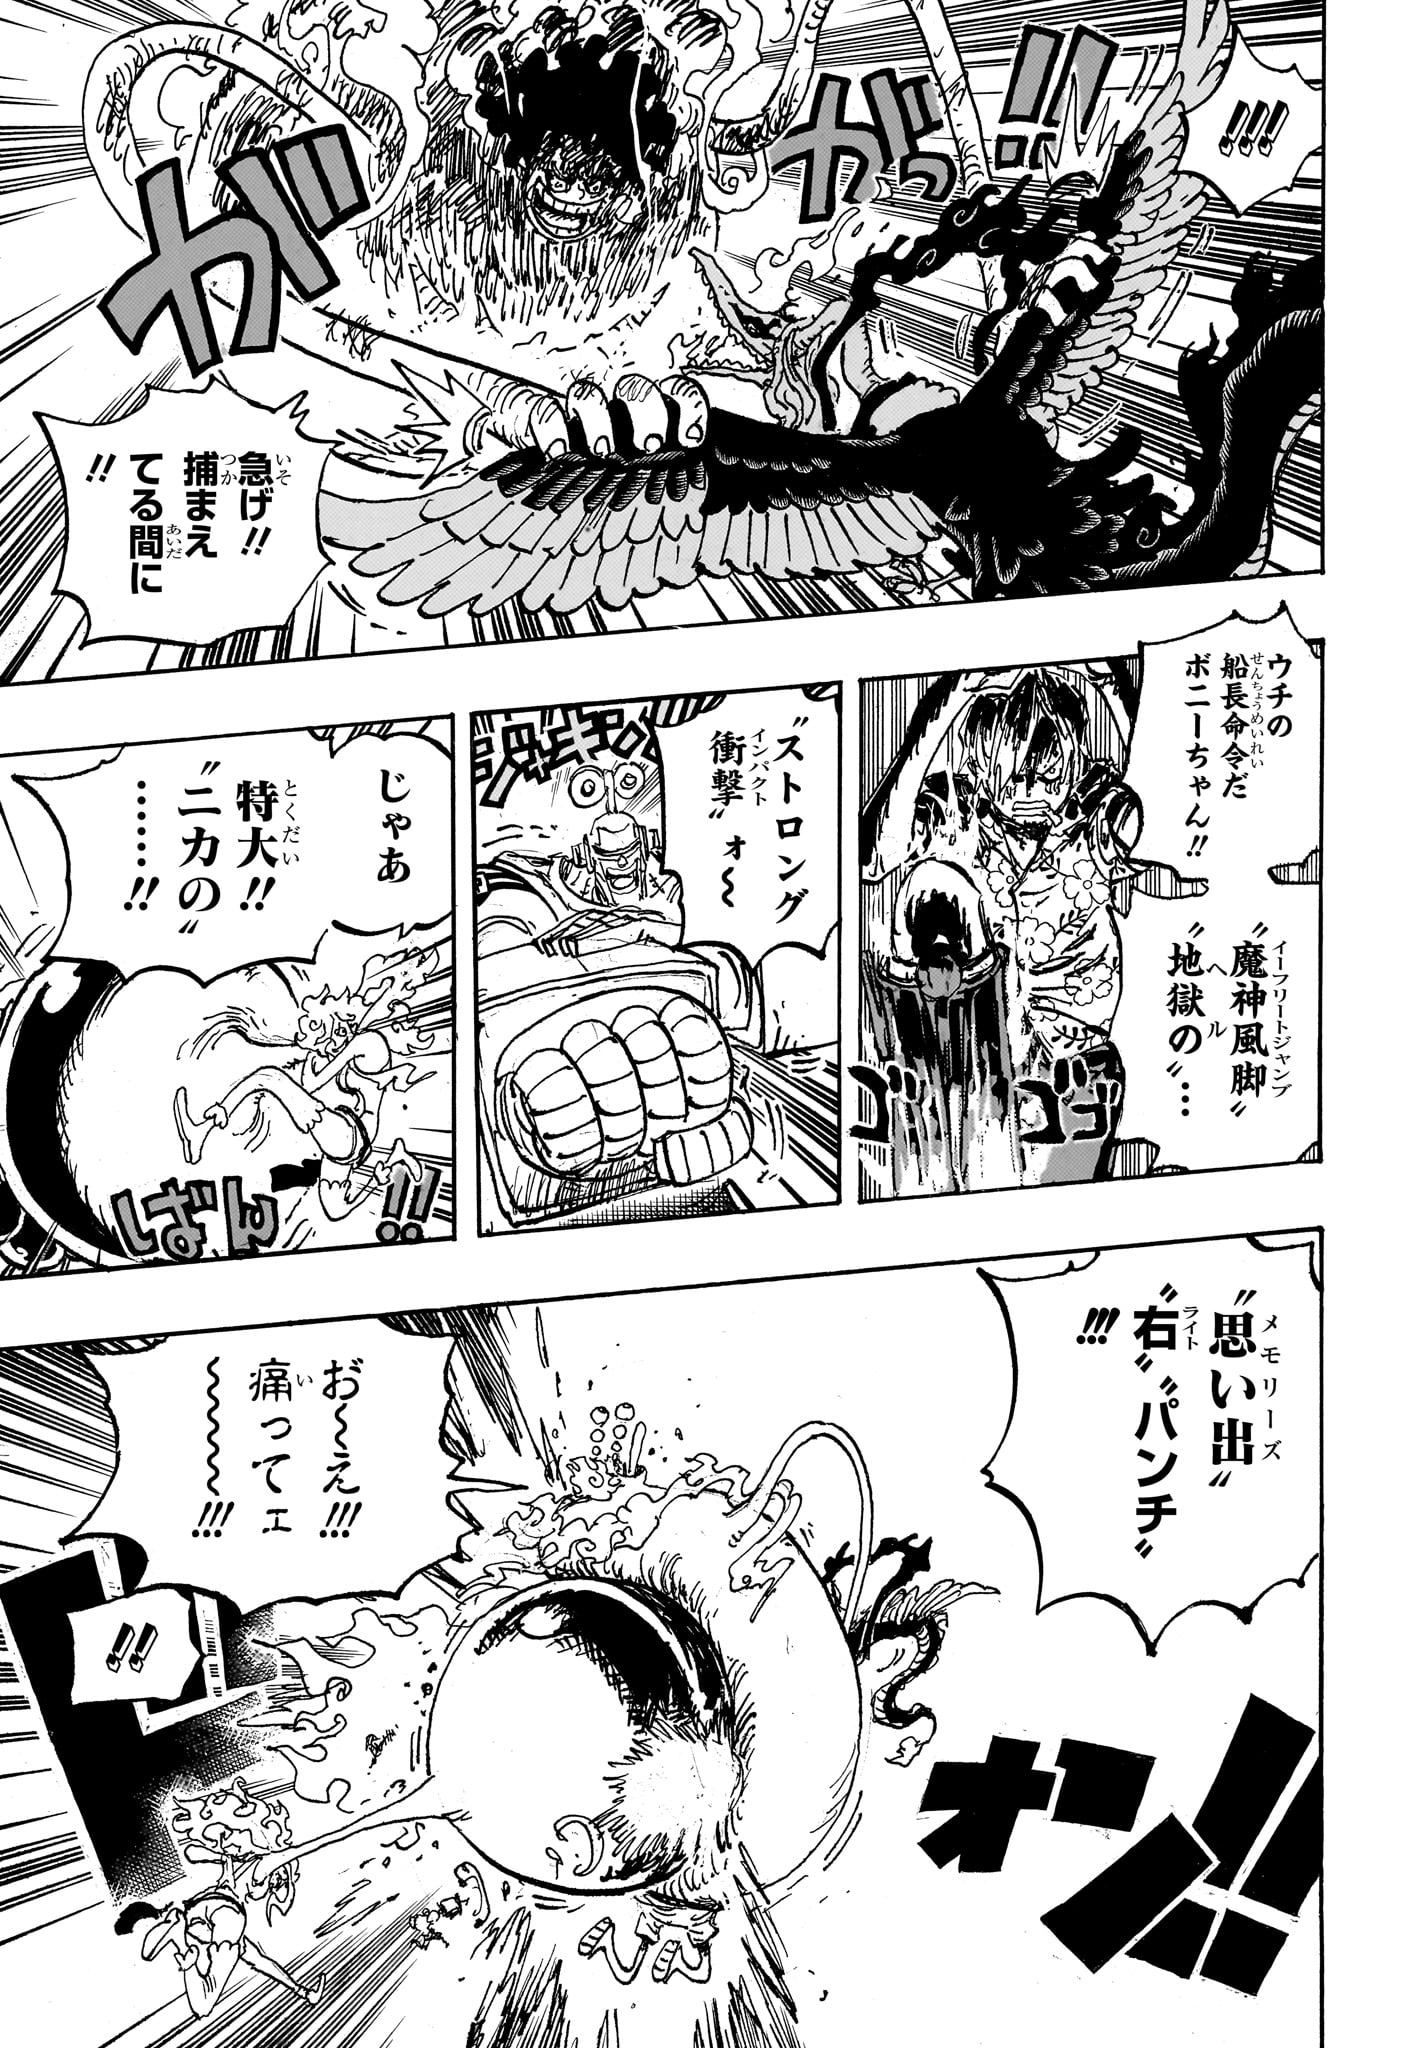 One Piece - Chapter 1119 - Page 5